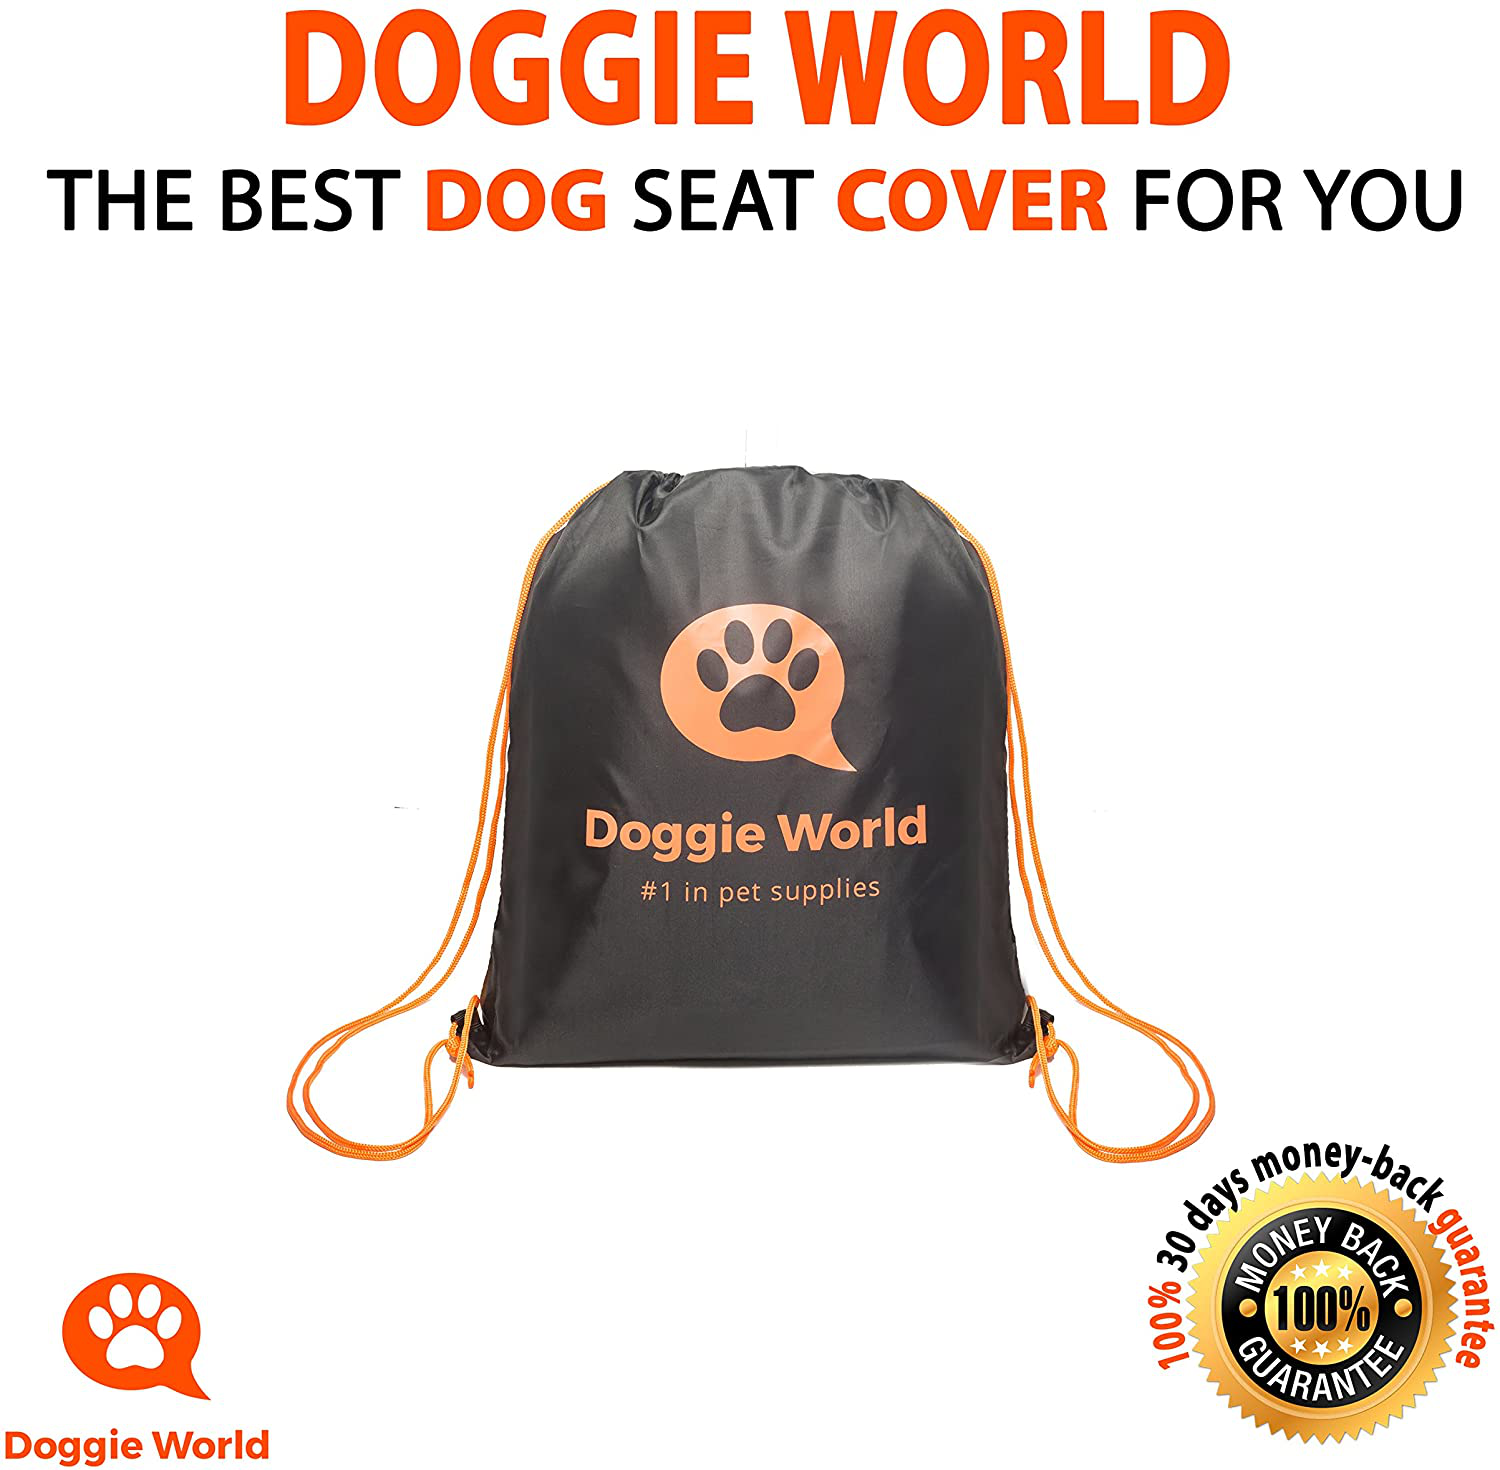 Ruff Liners Waterproof Dog Seat Cover for Trucks and SUVs - Machine Washable with Door Protector